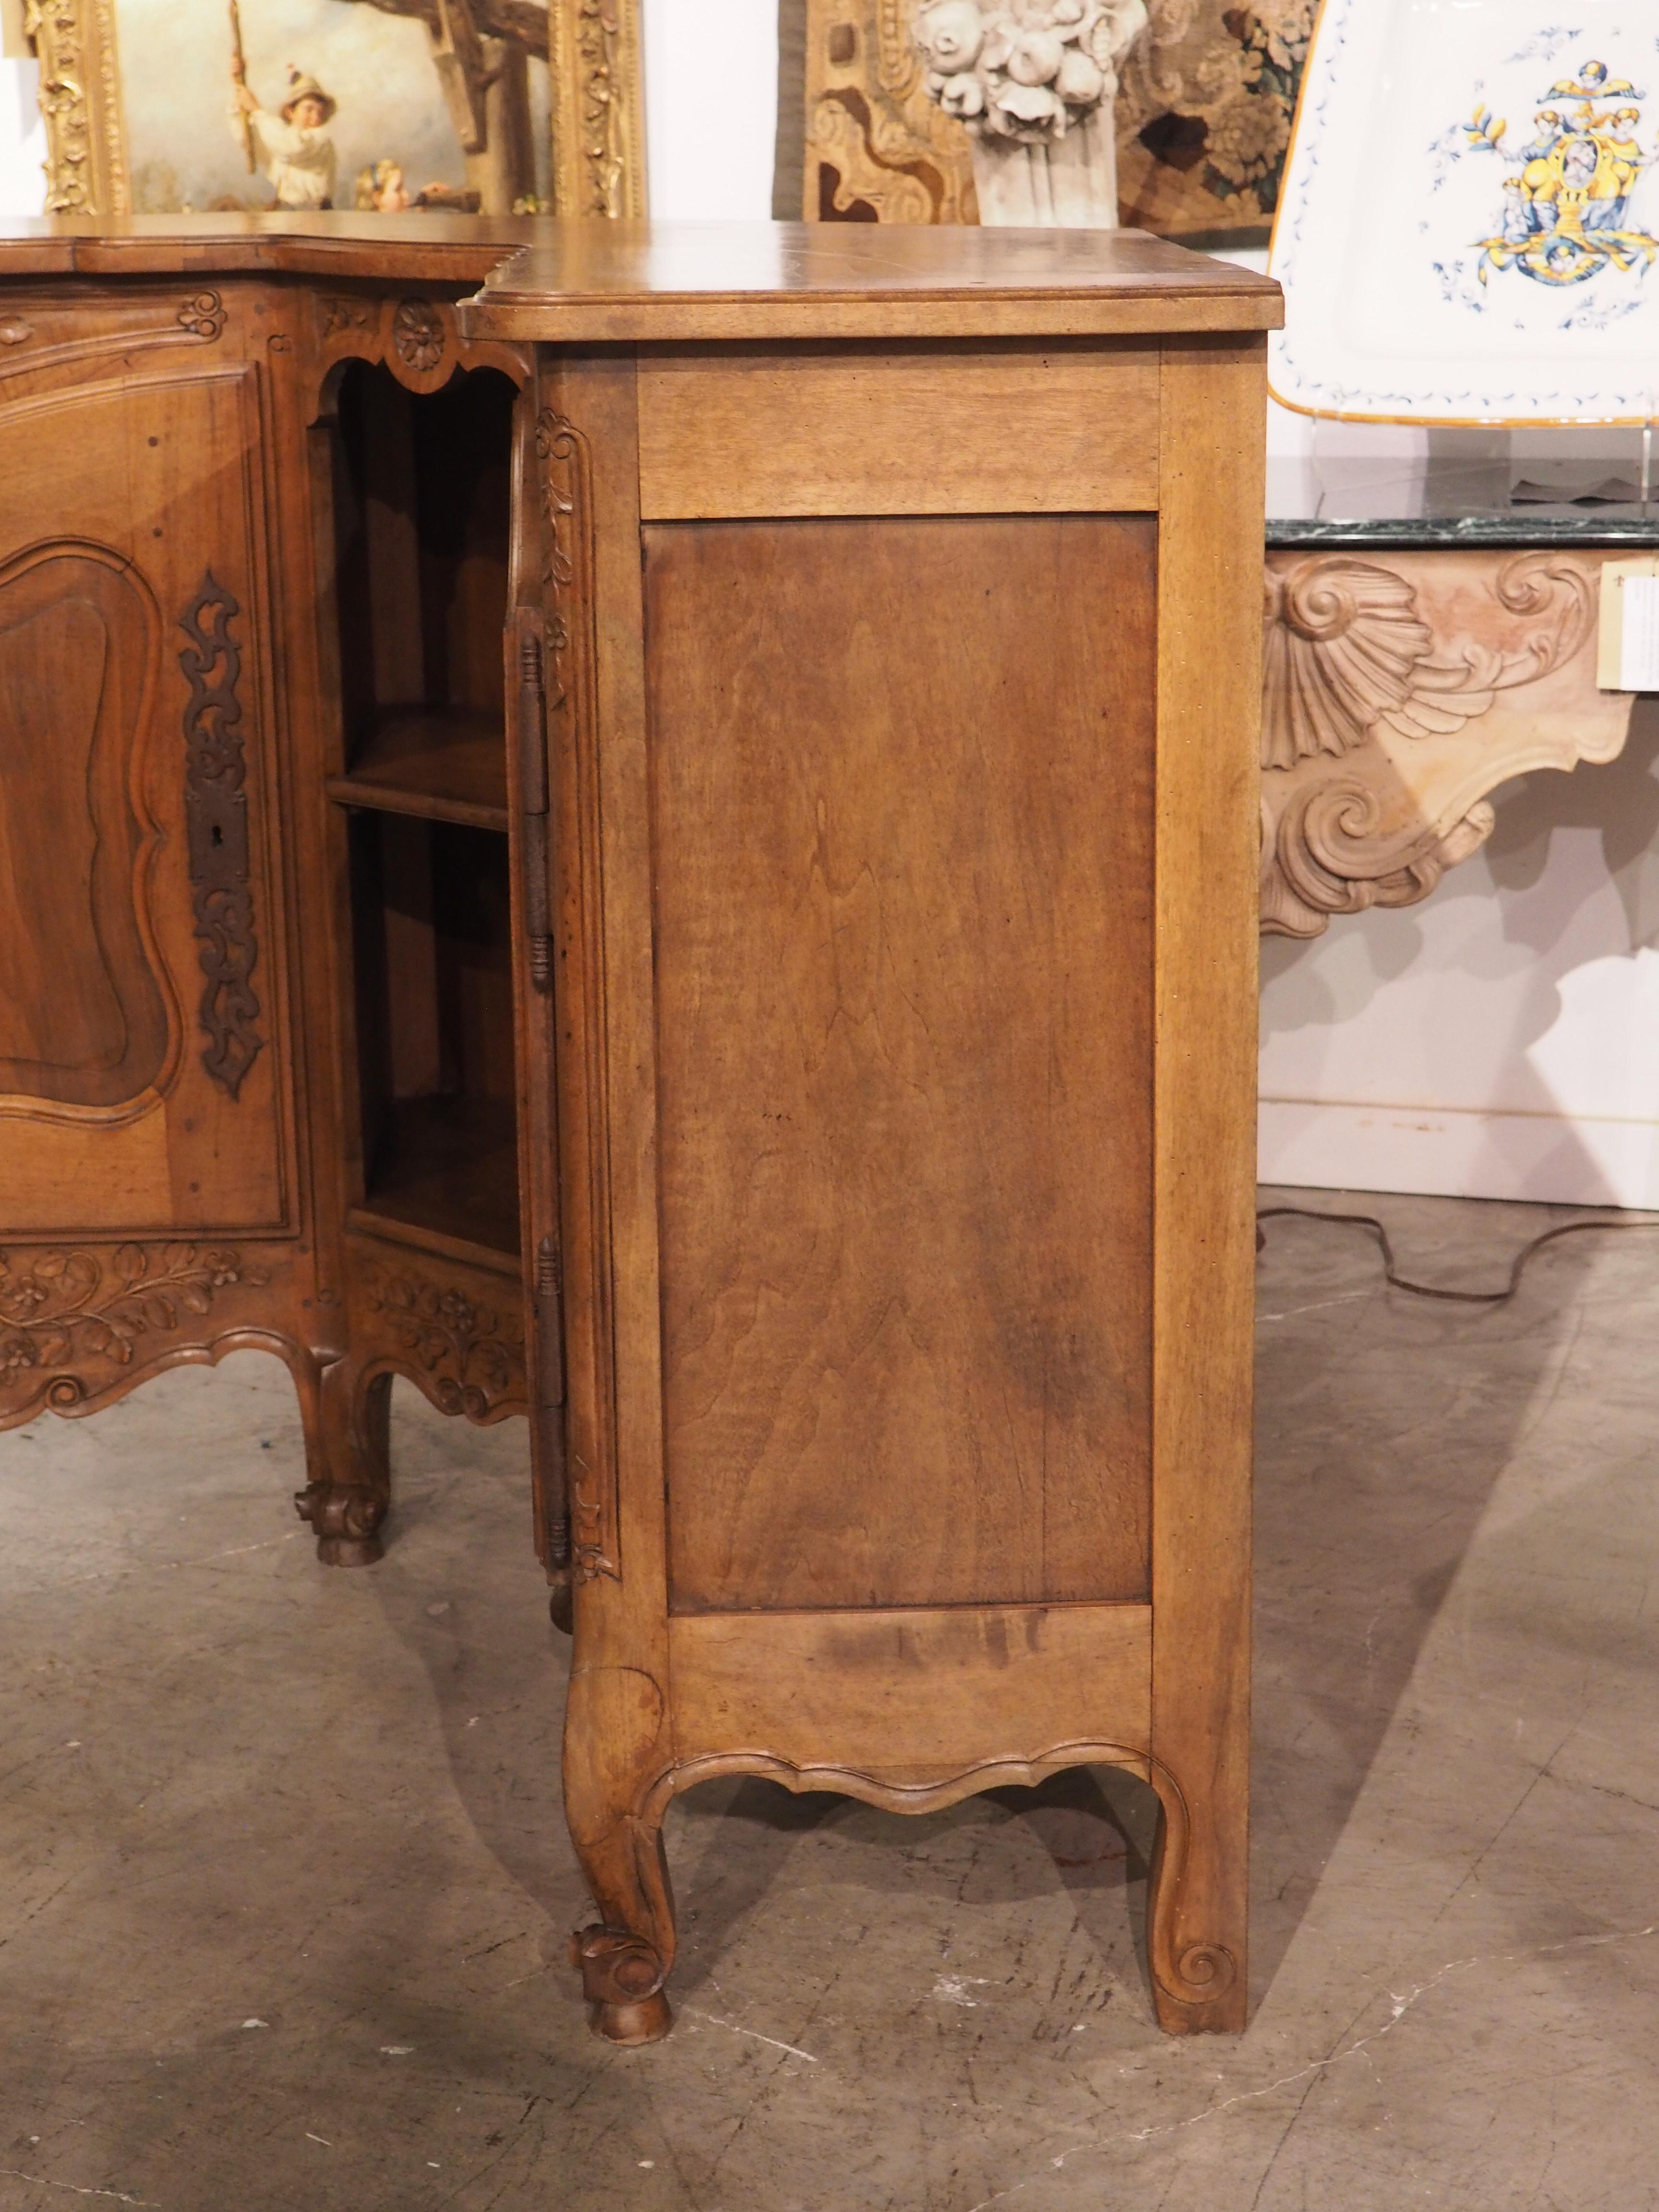 Known as an encoignure in France (literally “corner”), this corner buffet was hand-carved in Provence, circa 1900. First seen during the reign of Louis XV, encoignures were light, full of movement, and highly practical. The top, which has a thin